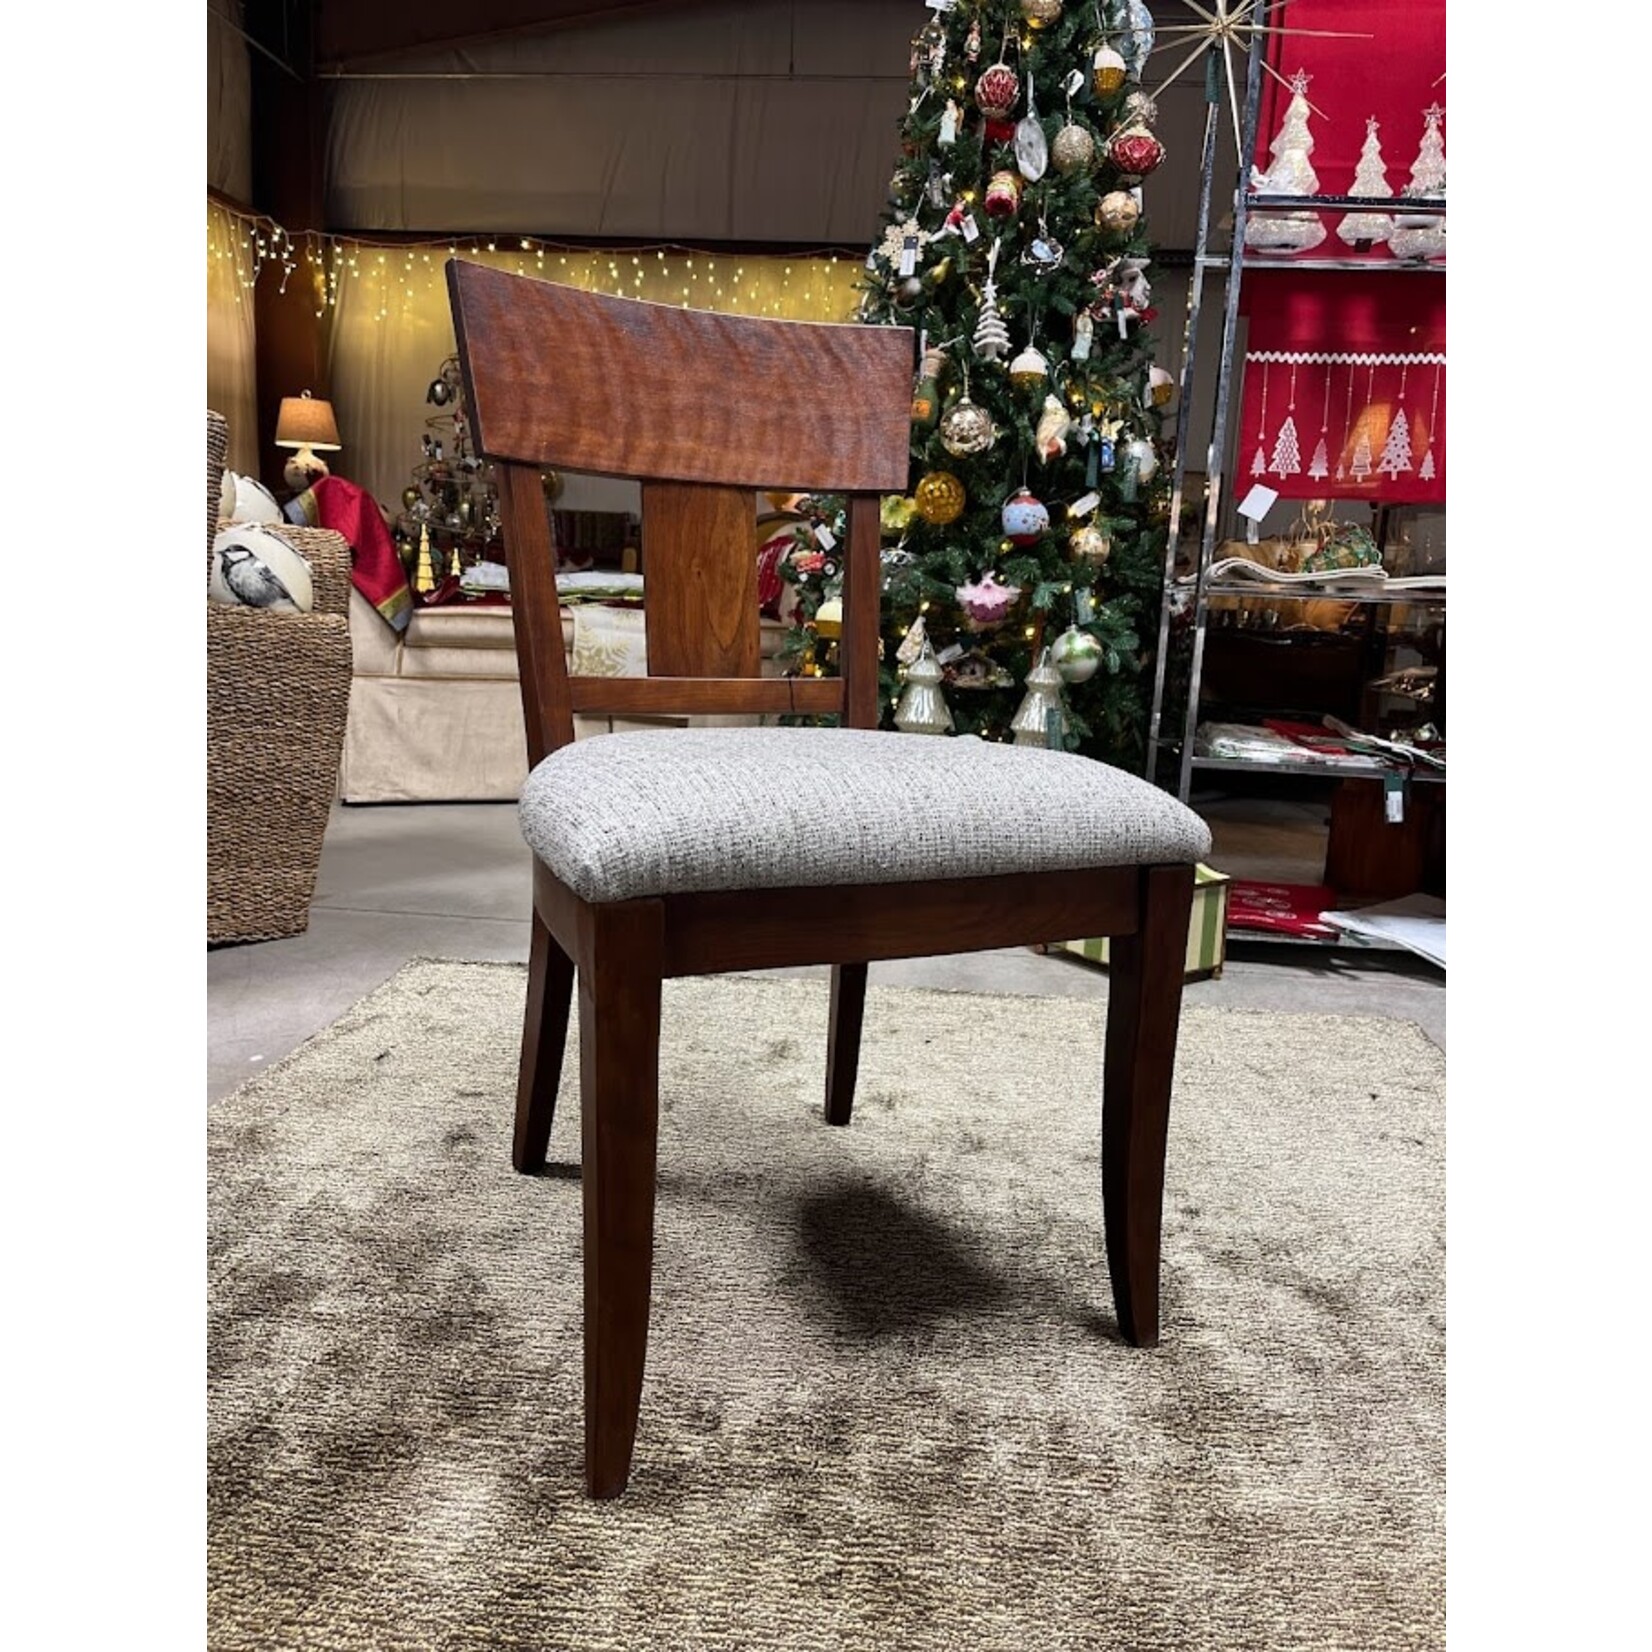 Gat Creek Caperton Thea Side Chair with Fabric Seat